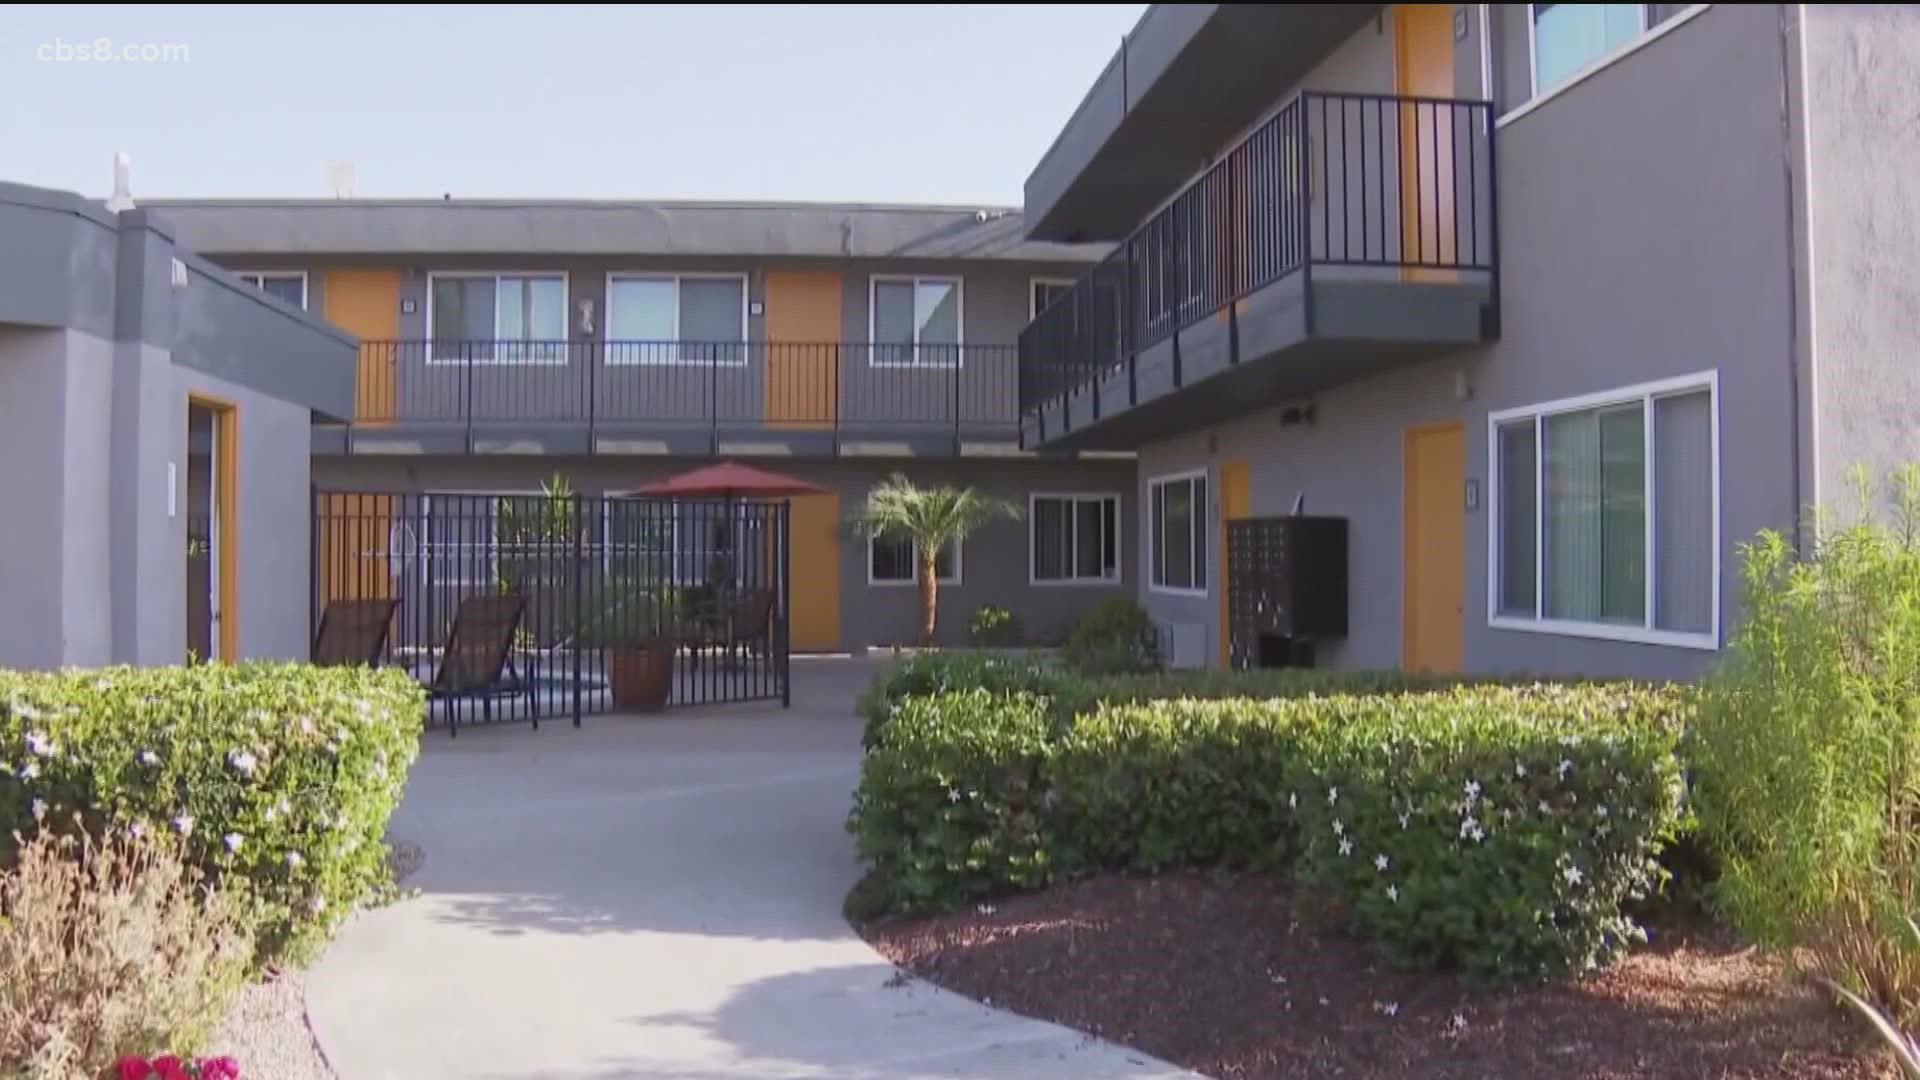 San Diego City Council to vote on eviction protections cbs8 com